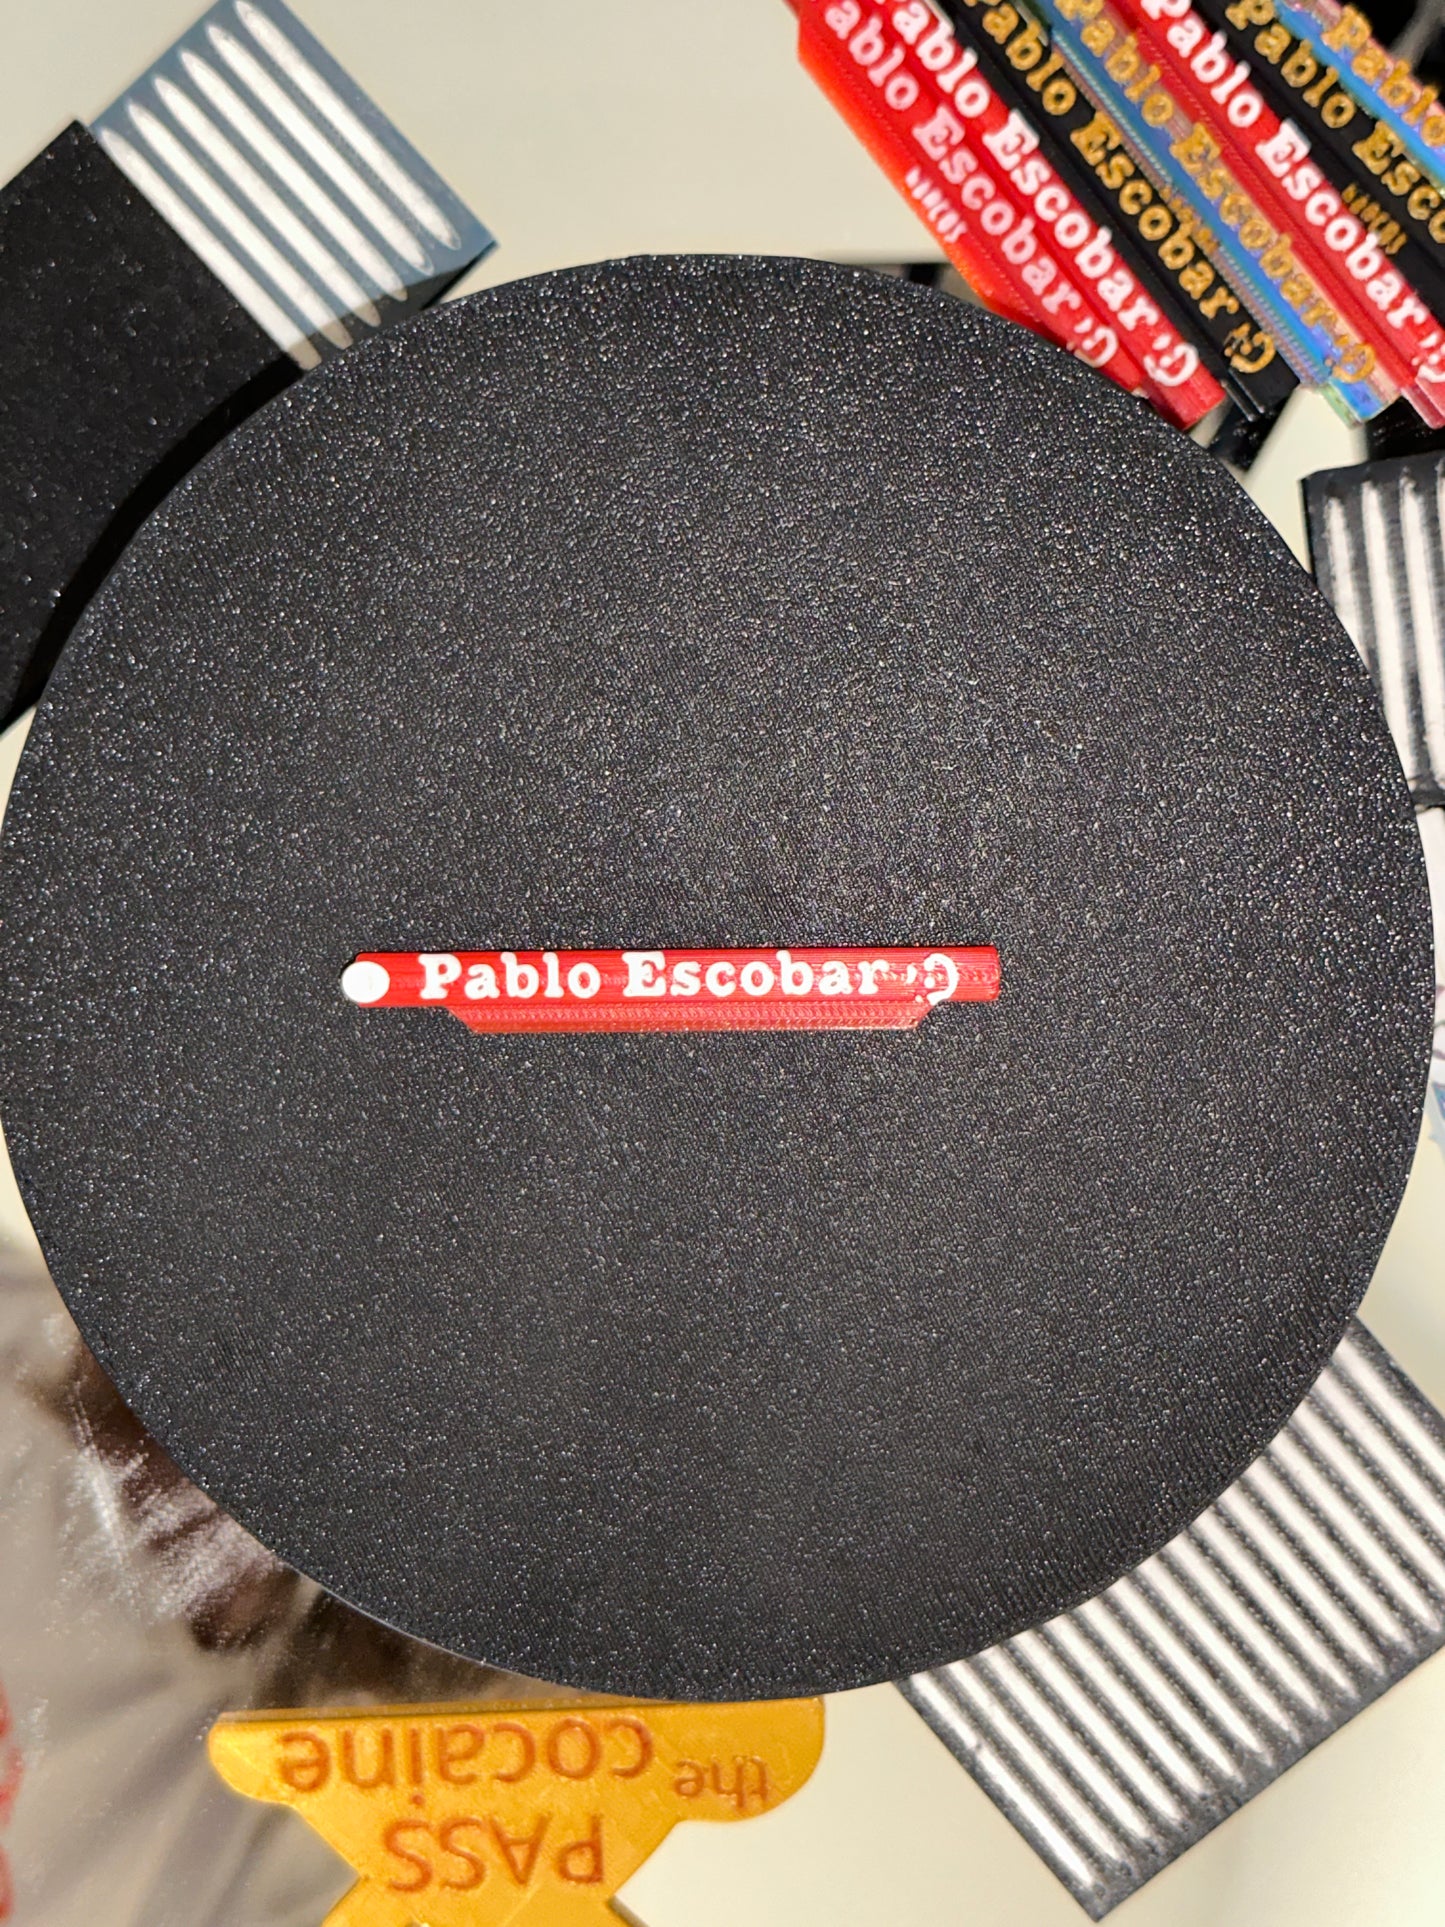 Strawpoon+ x Pablo Escobar Limited Edition Collection!